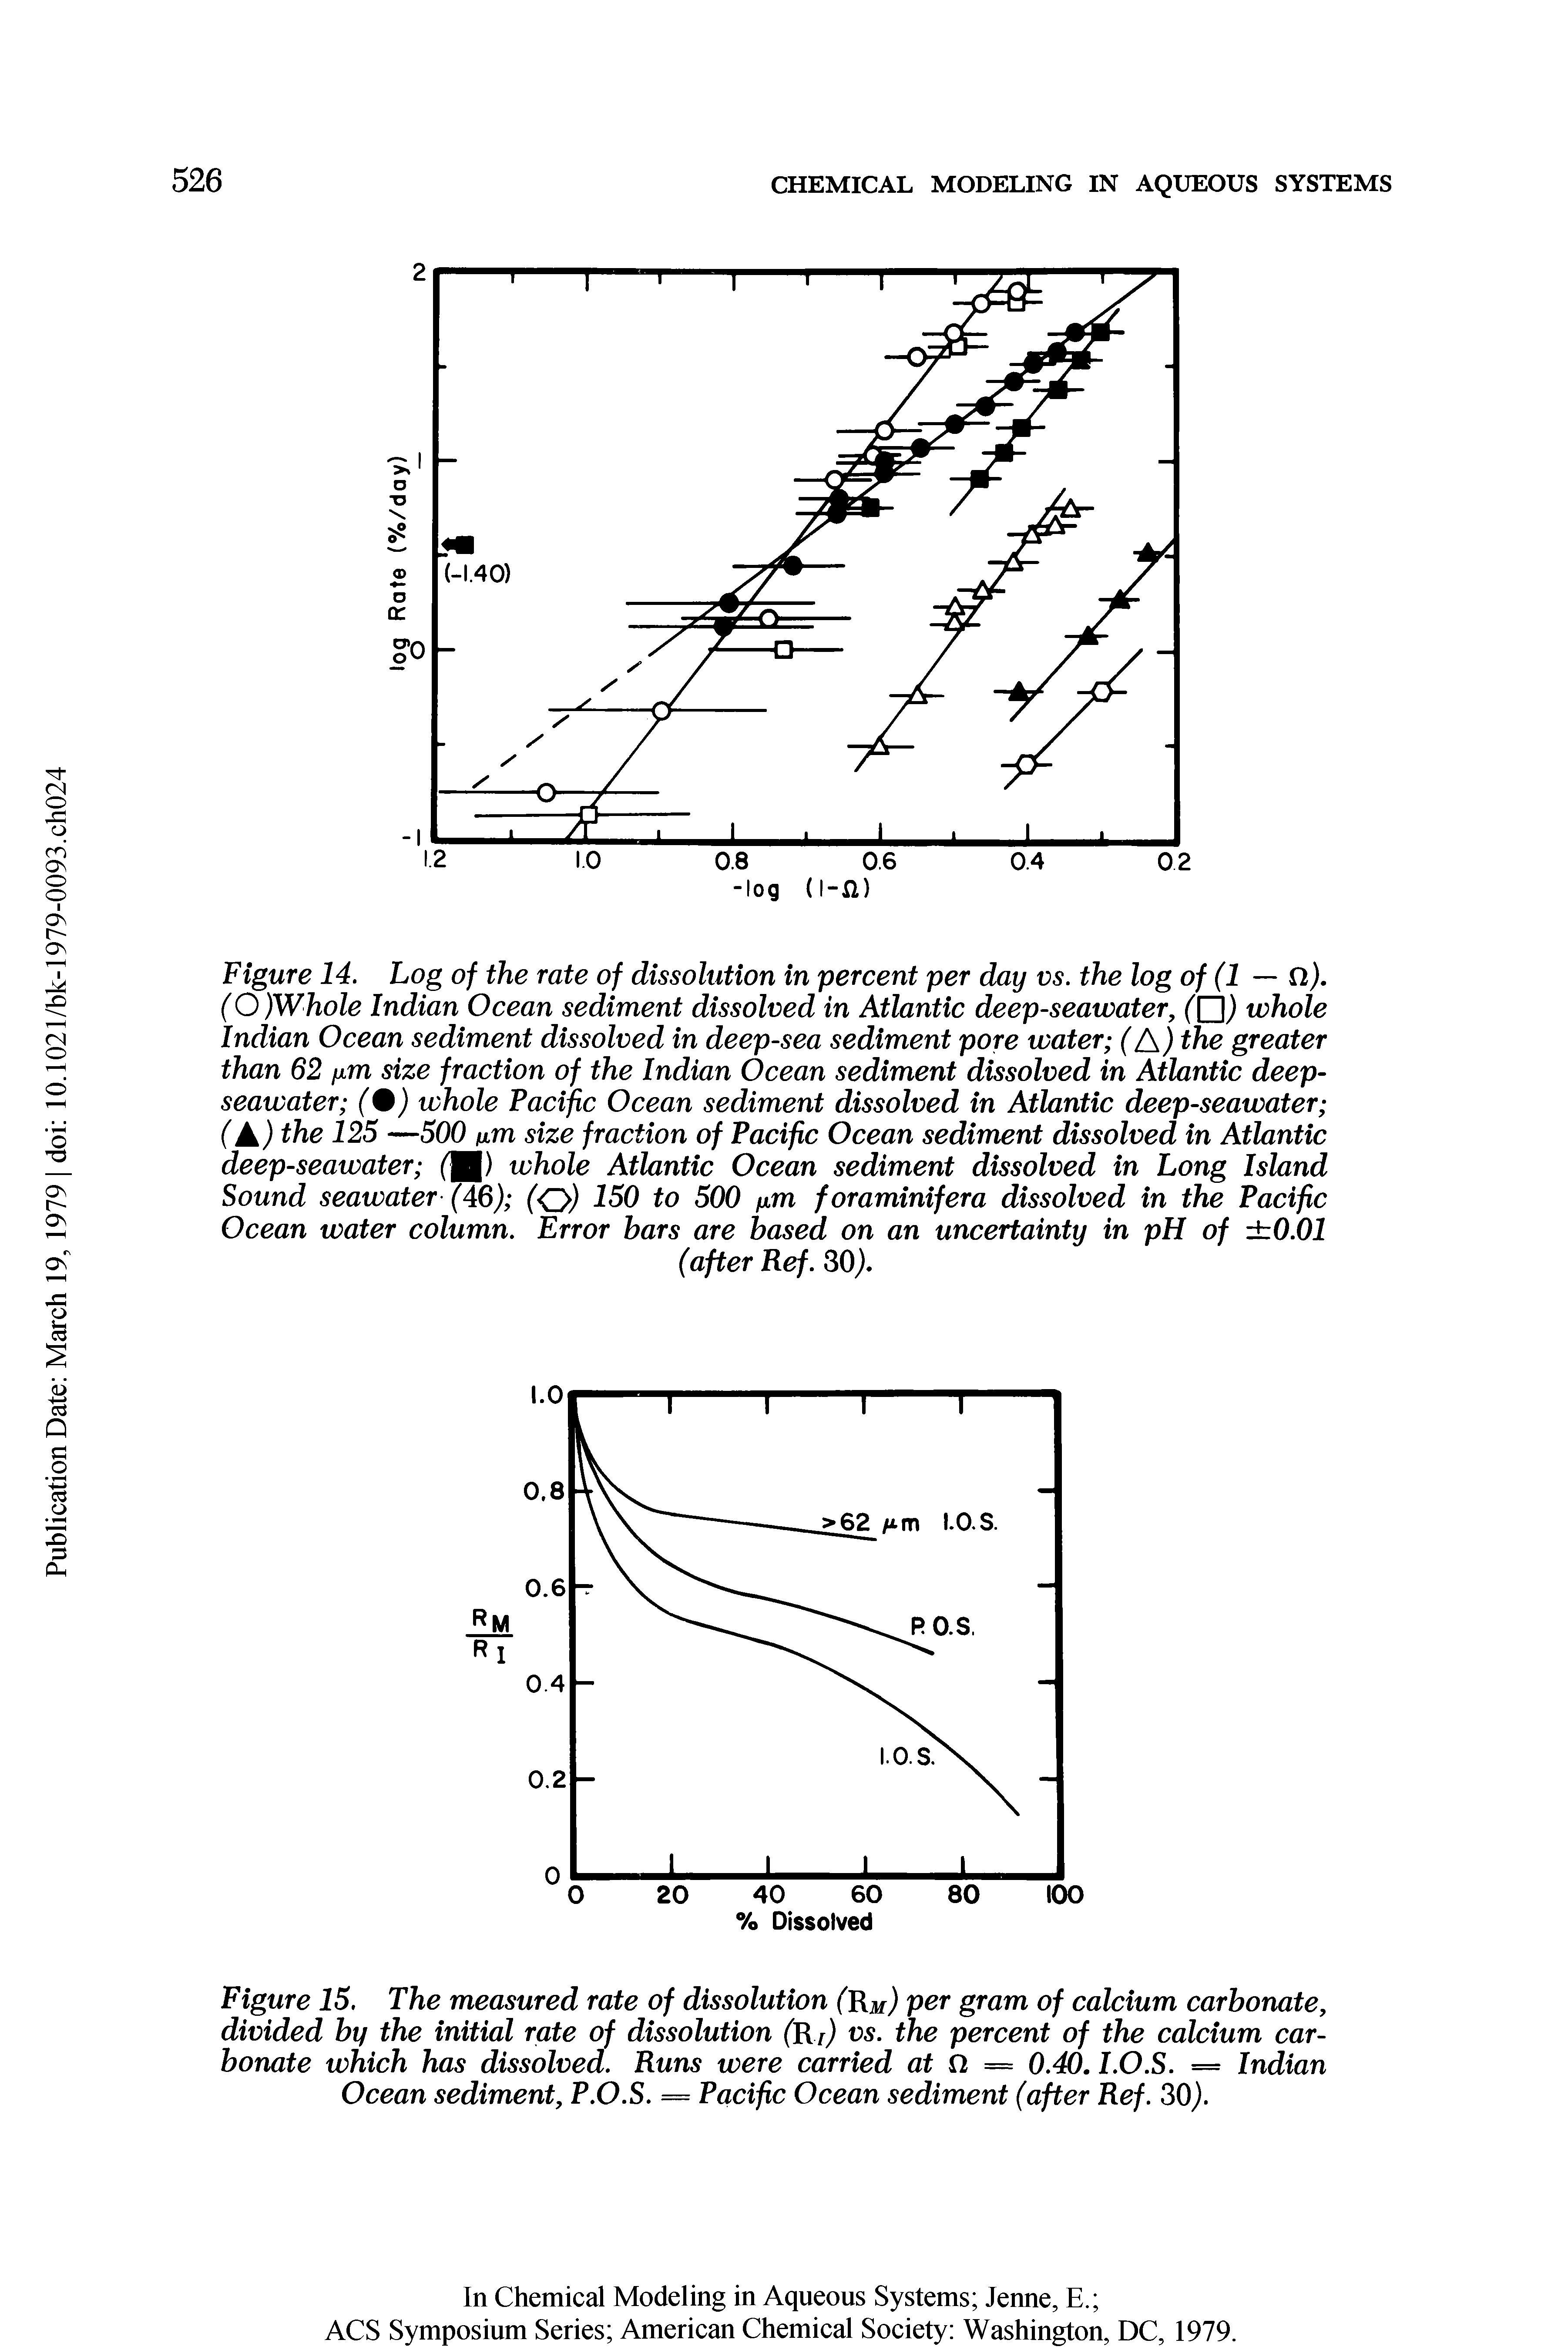 Figure 15. The measured rate of dissolution (Rm) per gram of calcium carbonate, divided by the initial rate of dissolution (Rr) vs. the percent of the calcium carbonate which has dissolved. Runs were carried at Q = 0.40.1.O.S. = Indian Ocean sediment, P.O.S. = Pacific Ocean sediment (after Ref. 30).